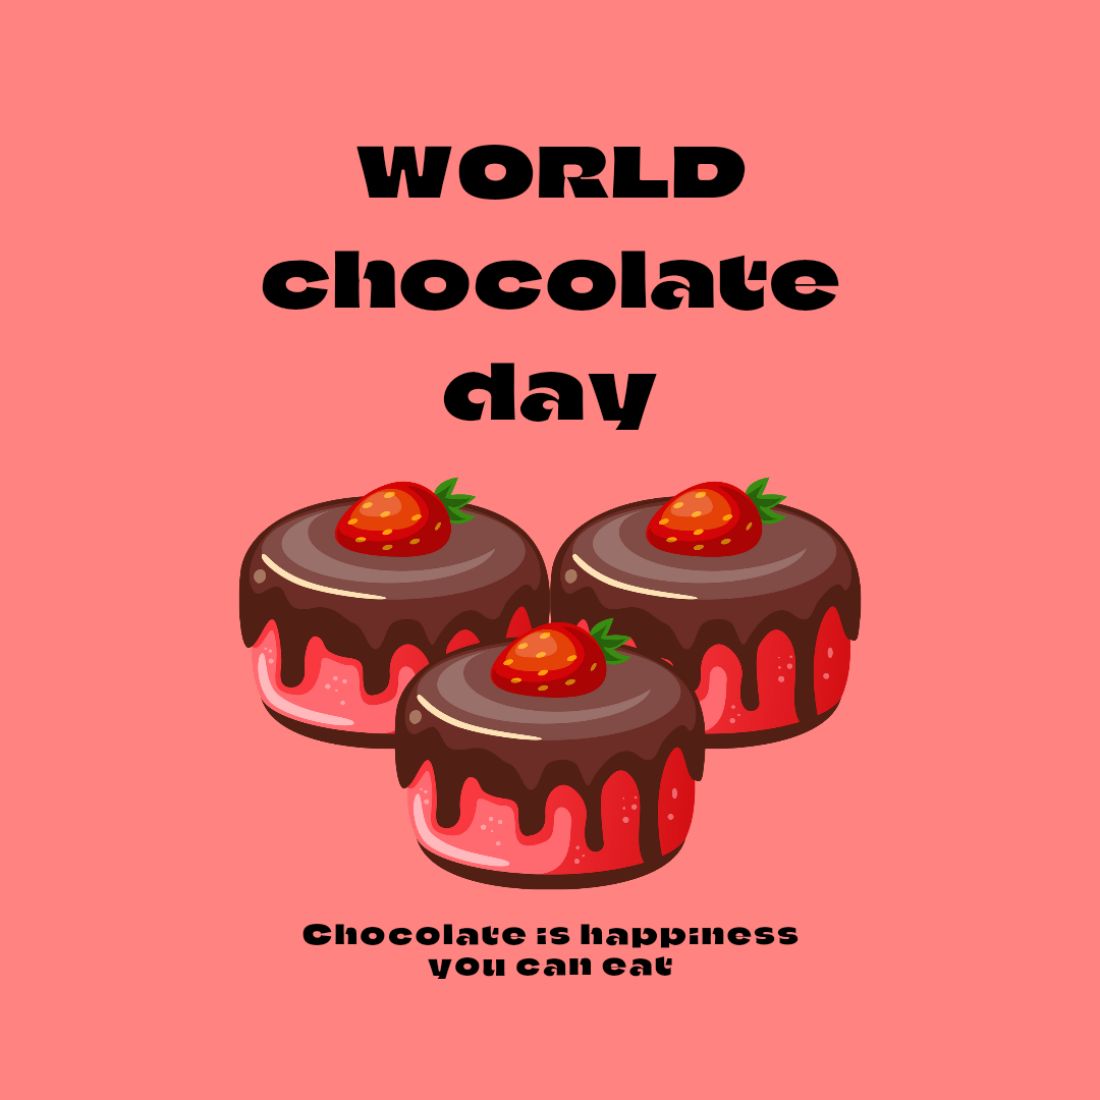 Chocolate Day Special Social Media Post Template cover image.